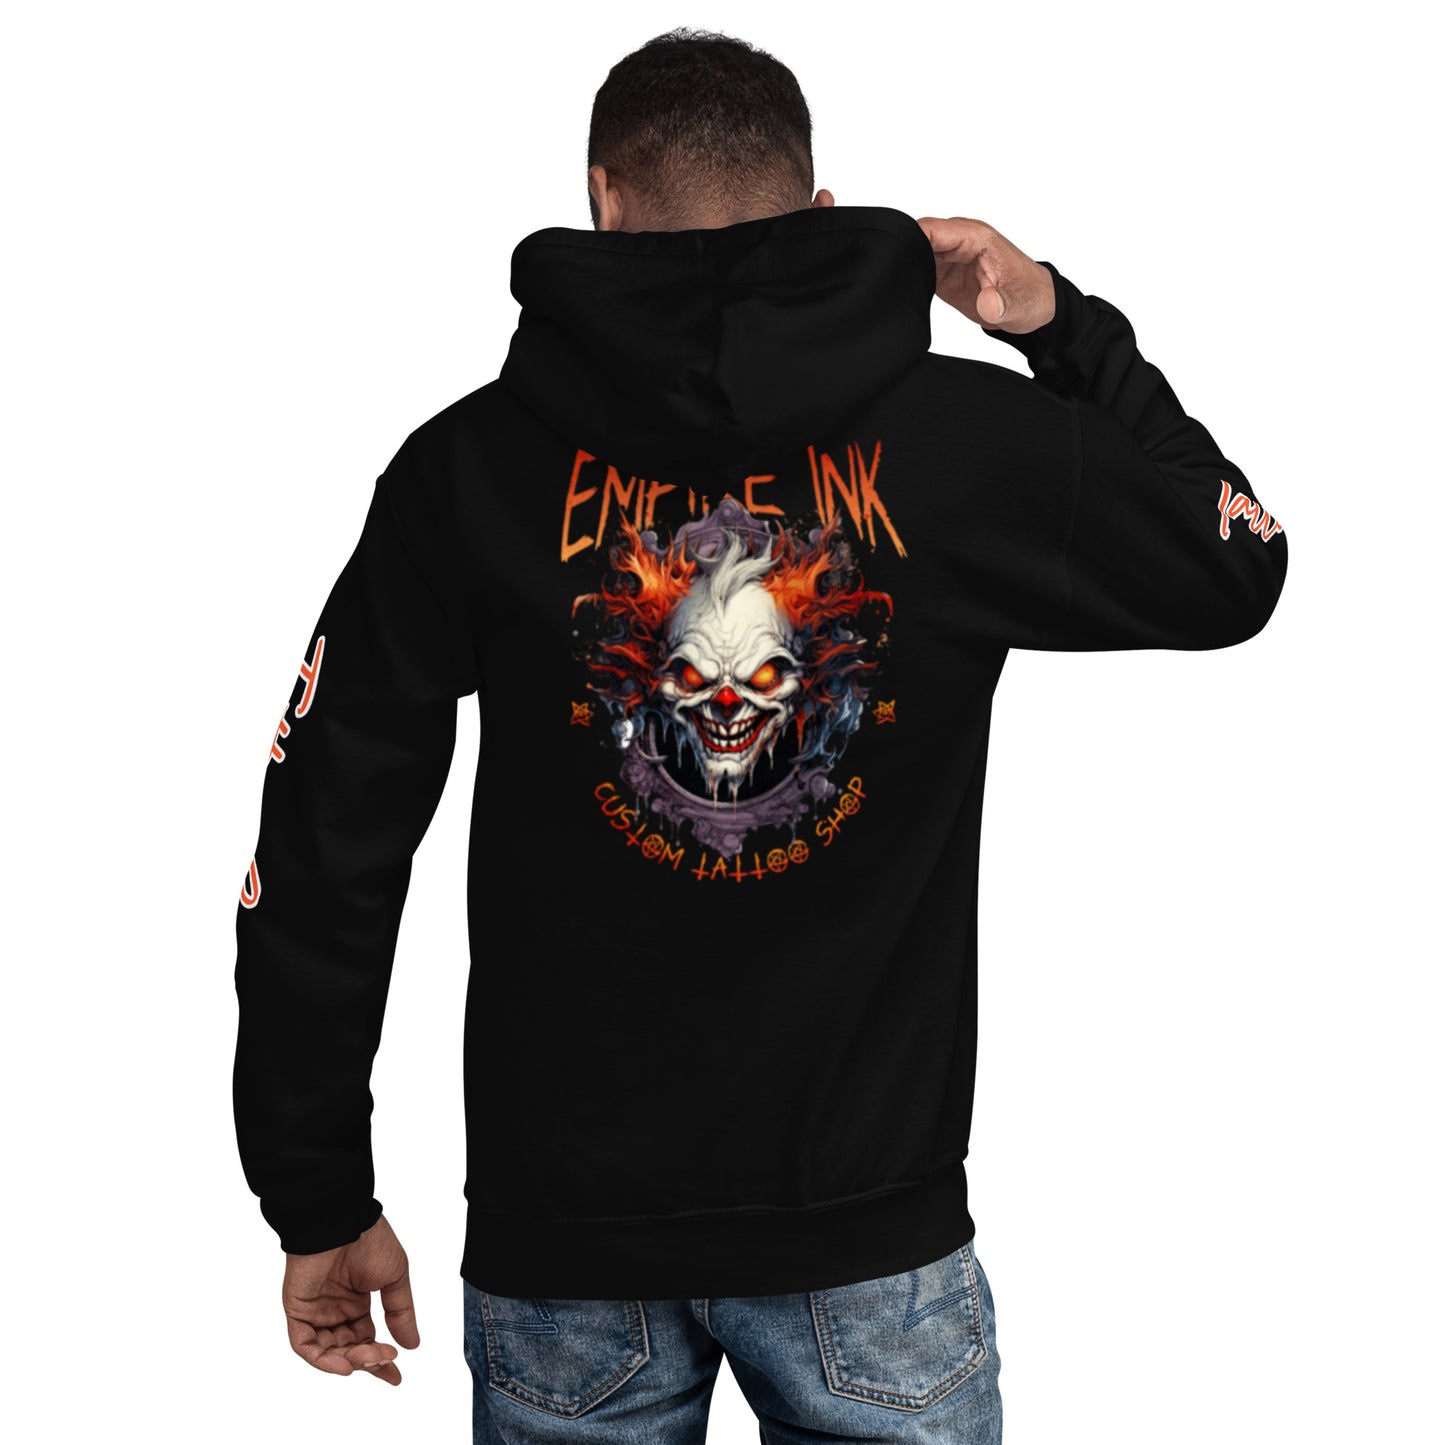 Unisex Hoodie up to 5xl